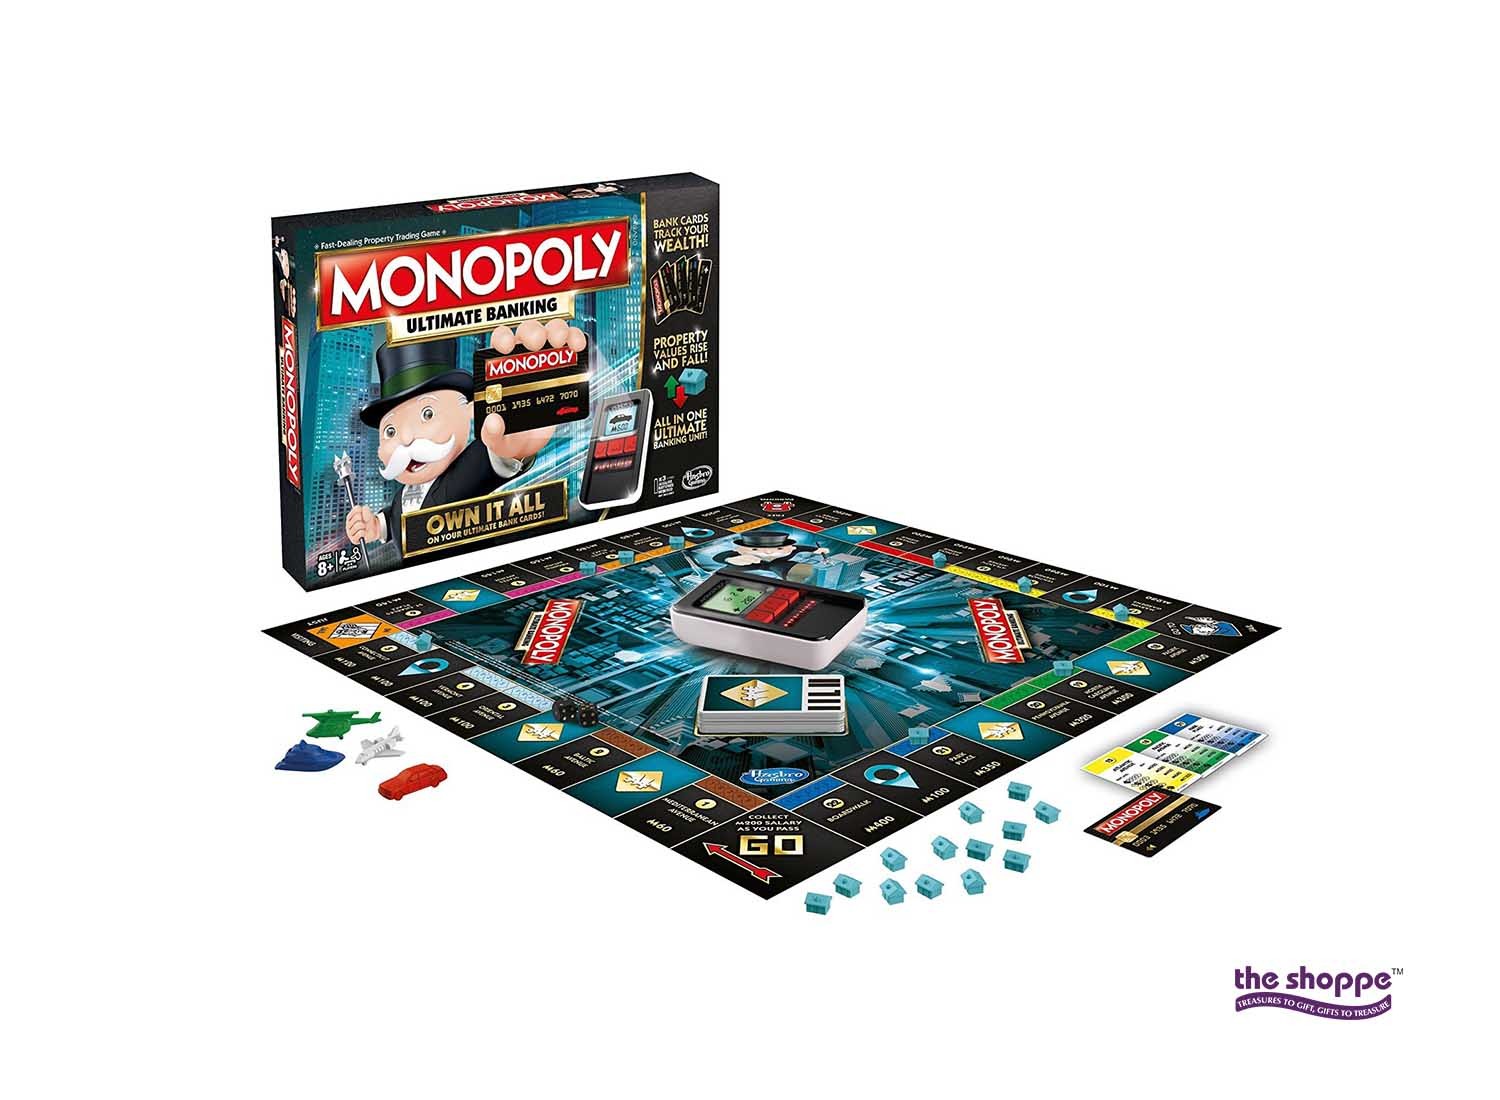 Monopoly Ultimate Banking - Board Games & Card Games - Toys